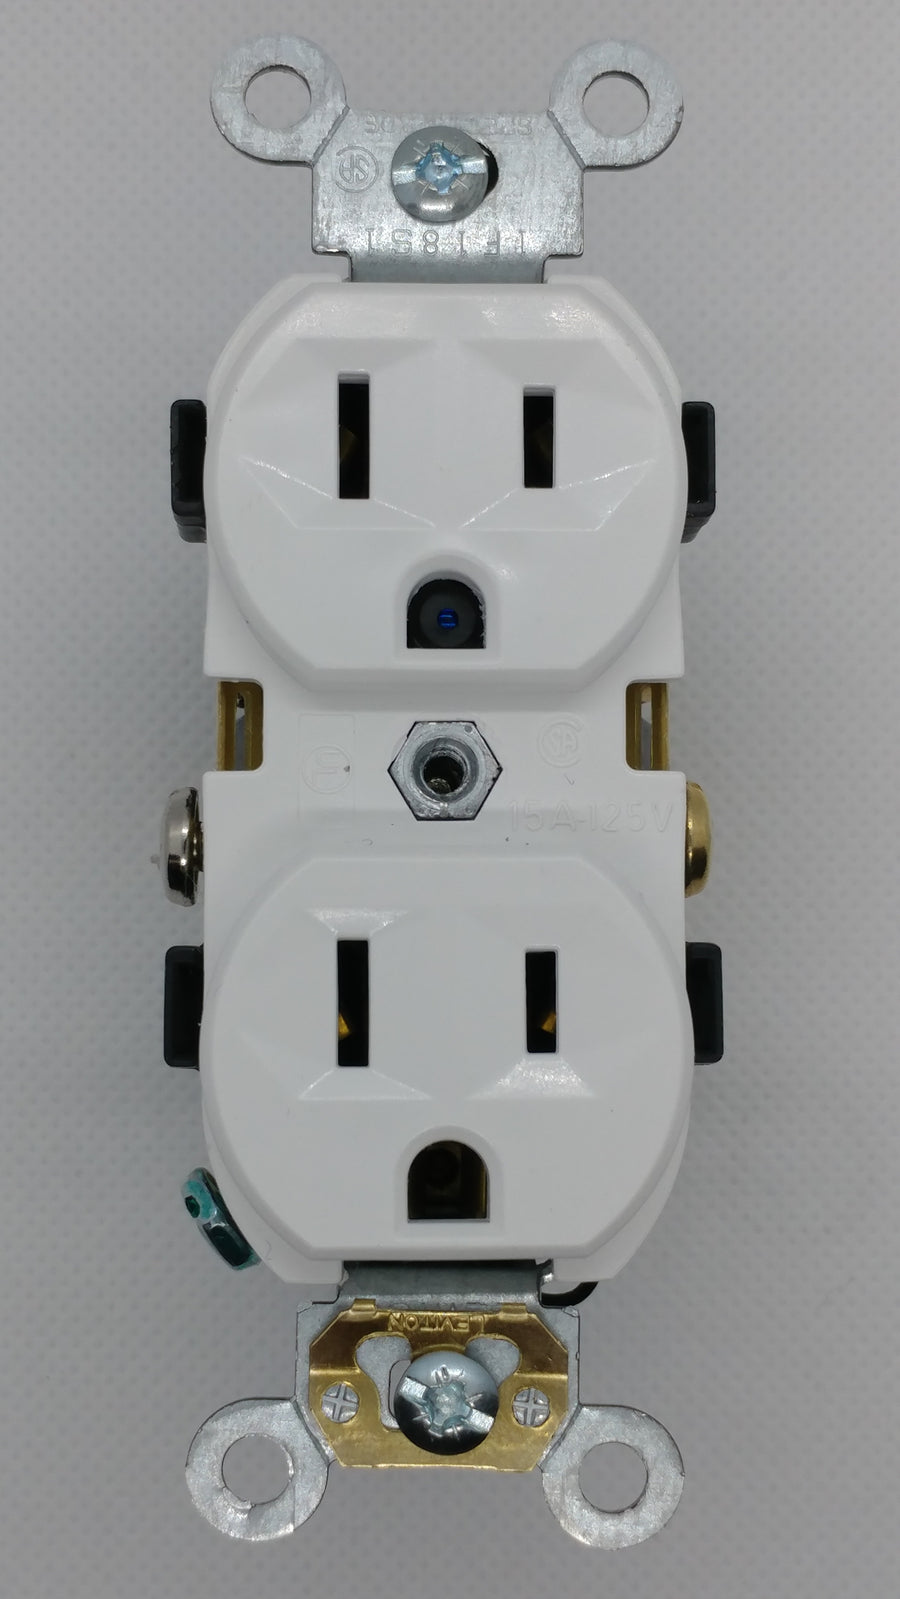 power outlet hidden camera with audio with live view